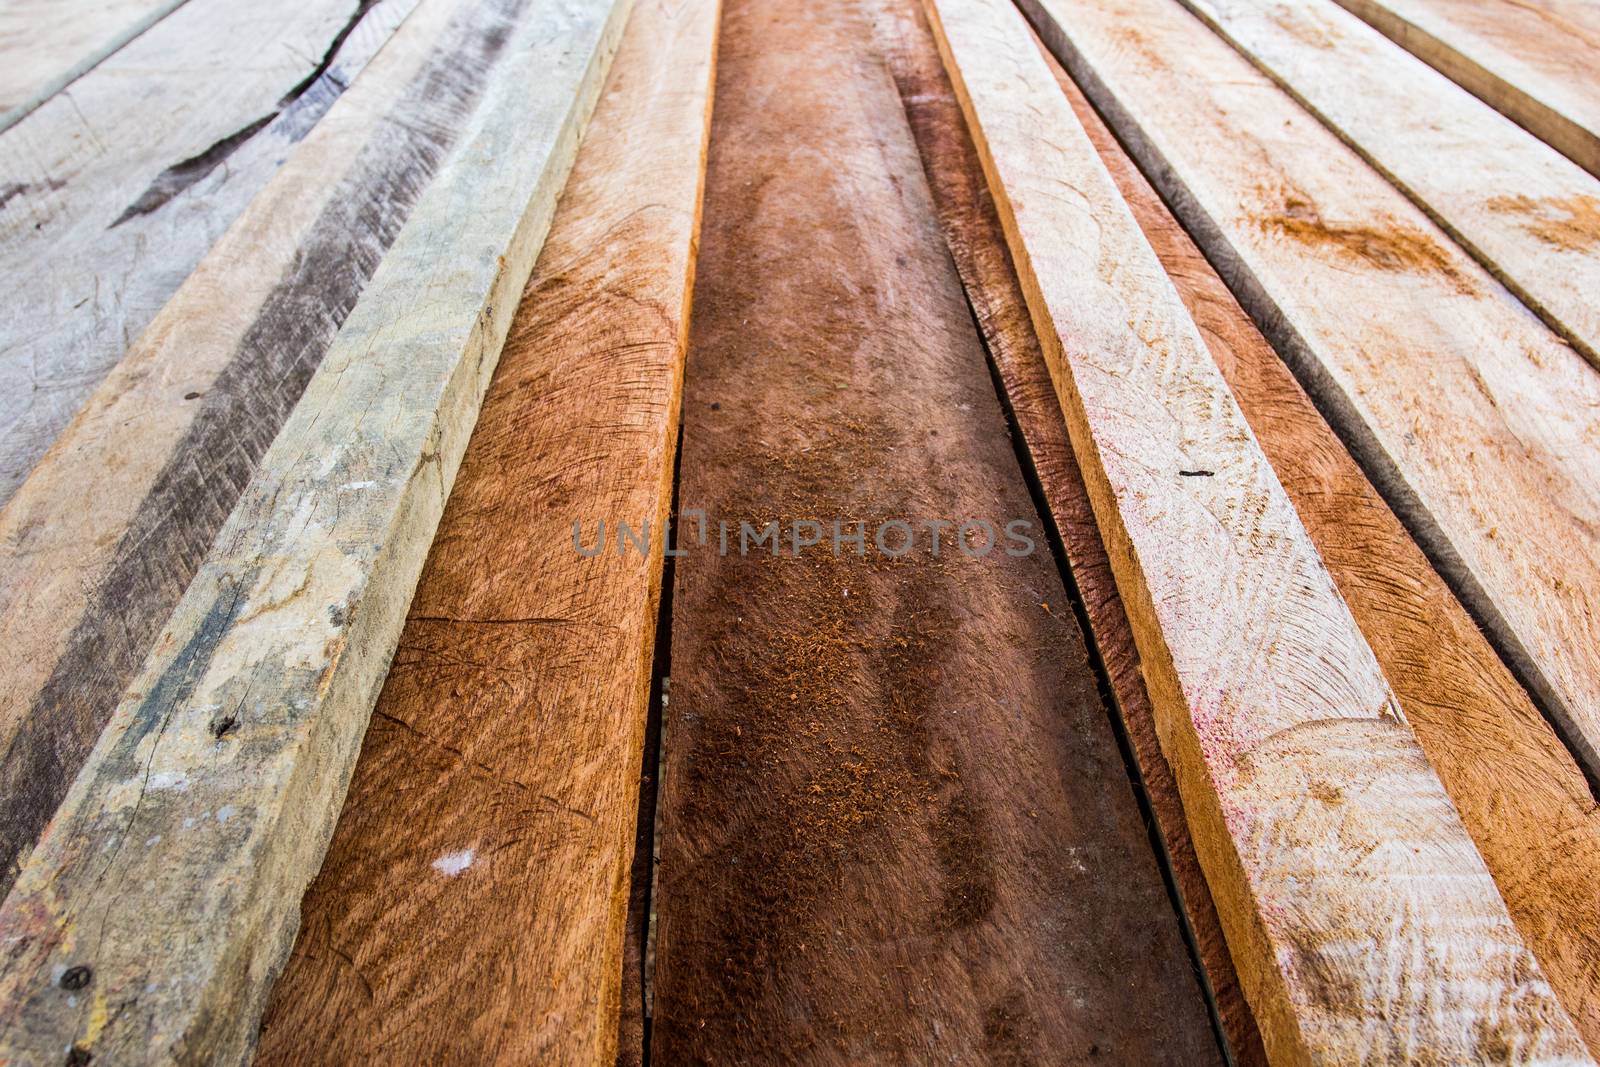 Wood planks by kannapon